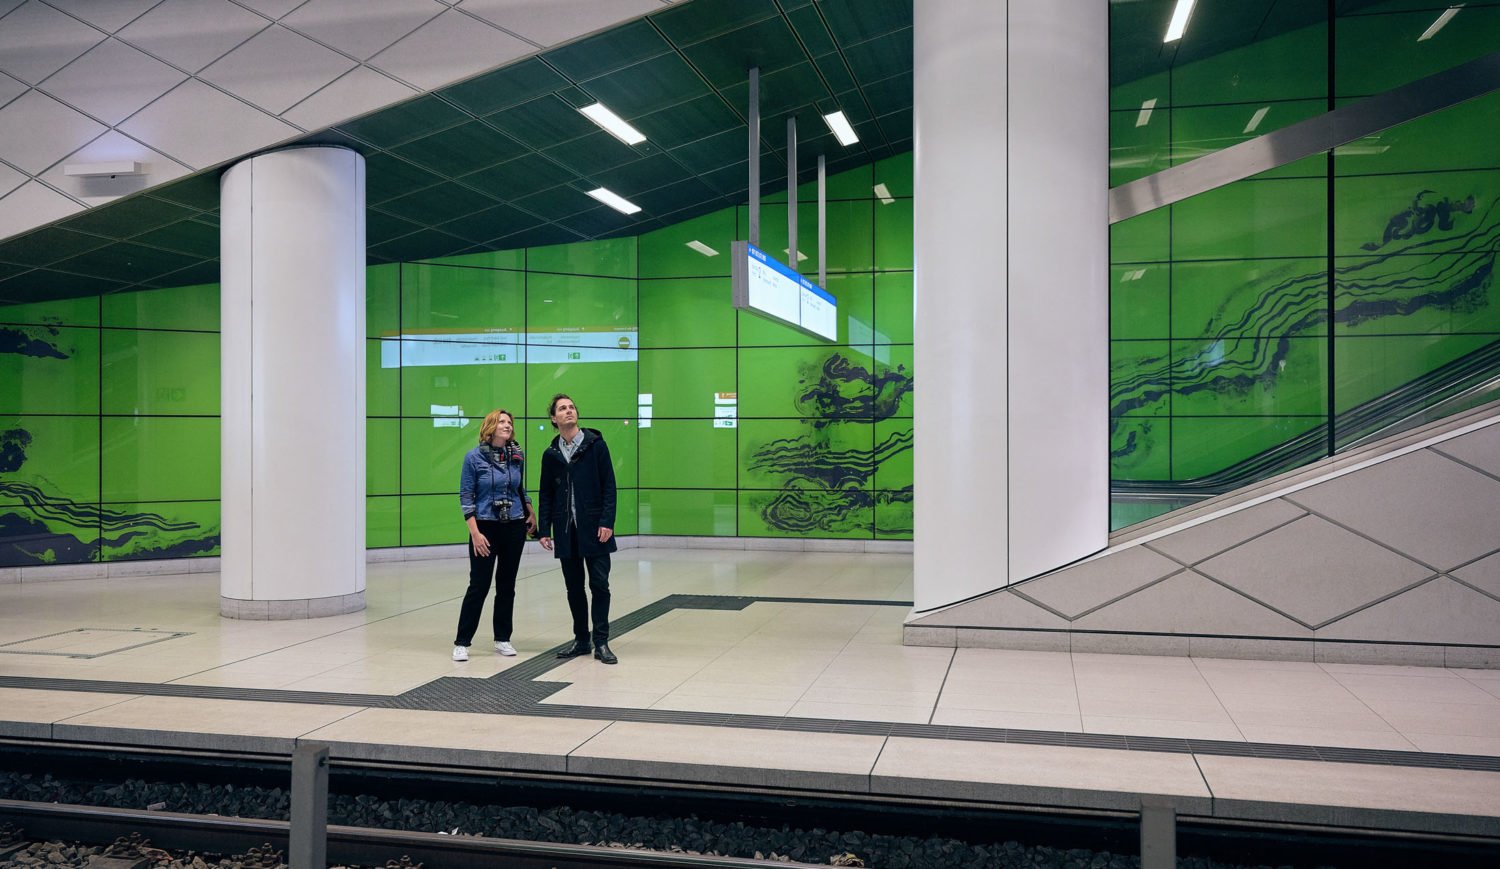 At Graf-Adolf-Platz station, green walls in agate stone look accompany you to the platform. The artwork is by the artist Manuel Franke © Düsseldorf Tourismus - Markus Luigs